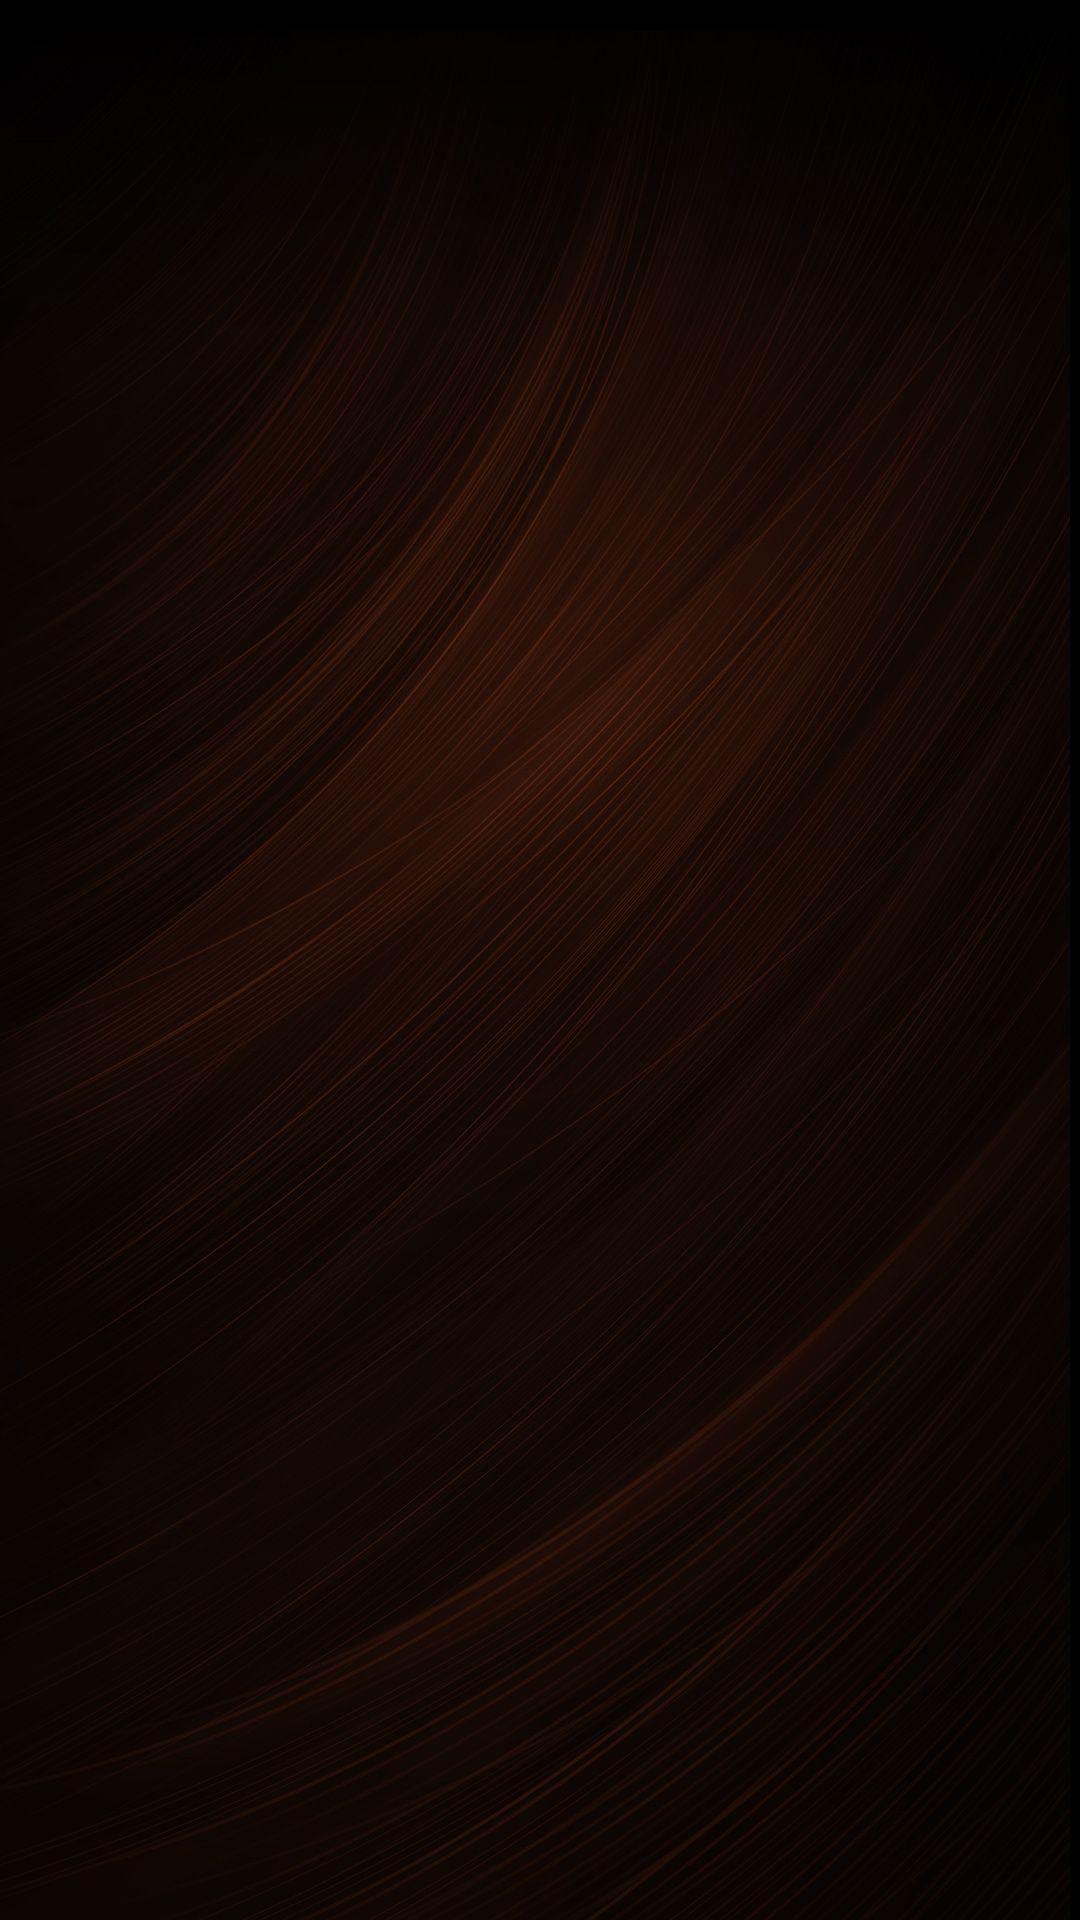 Redmi Note 4 stock wallpaper collection, Download it here. Xiaomi